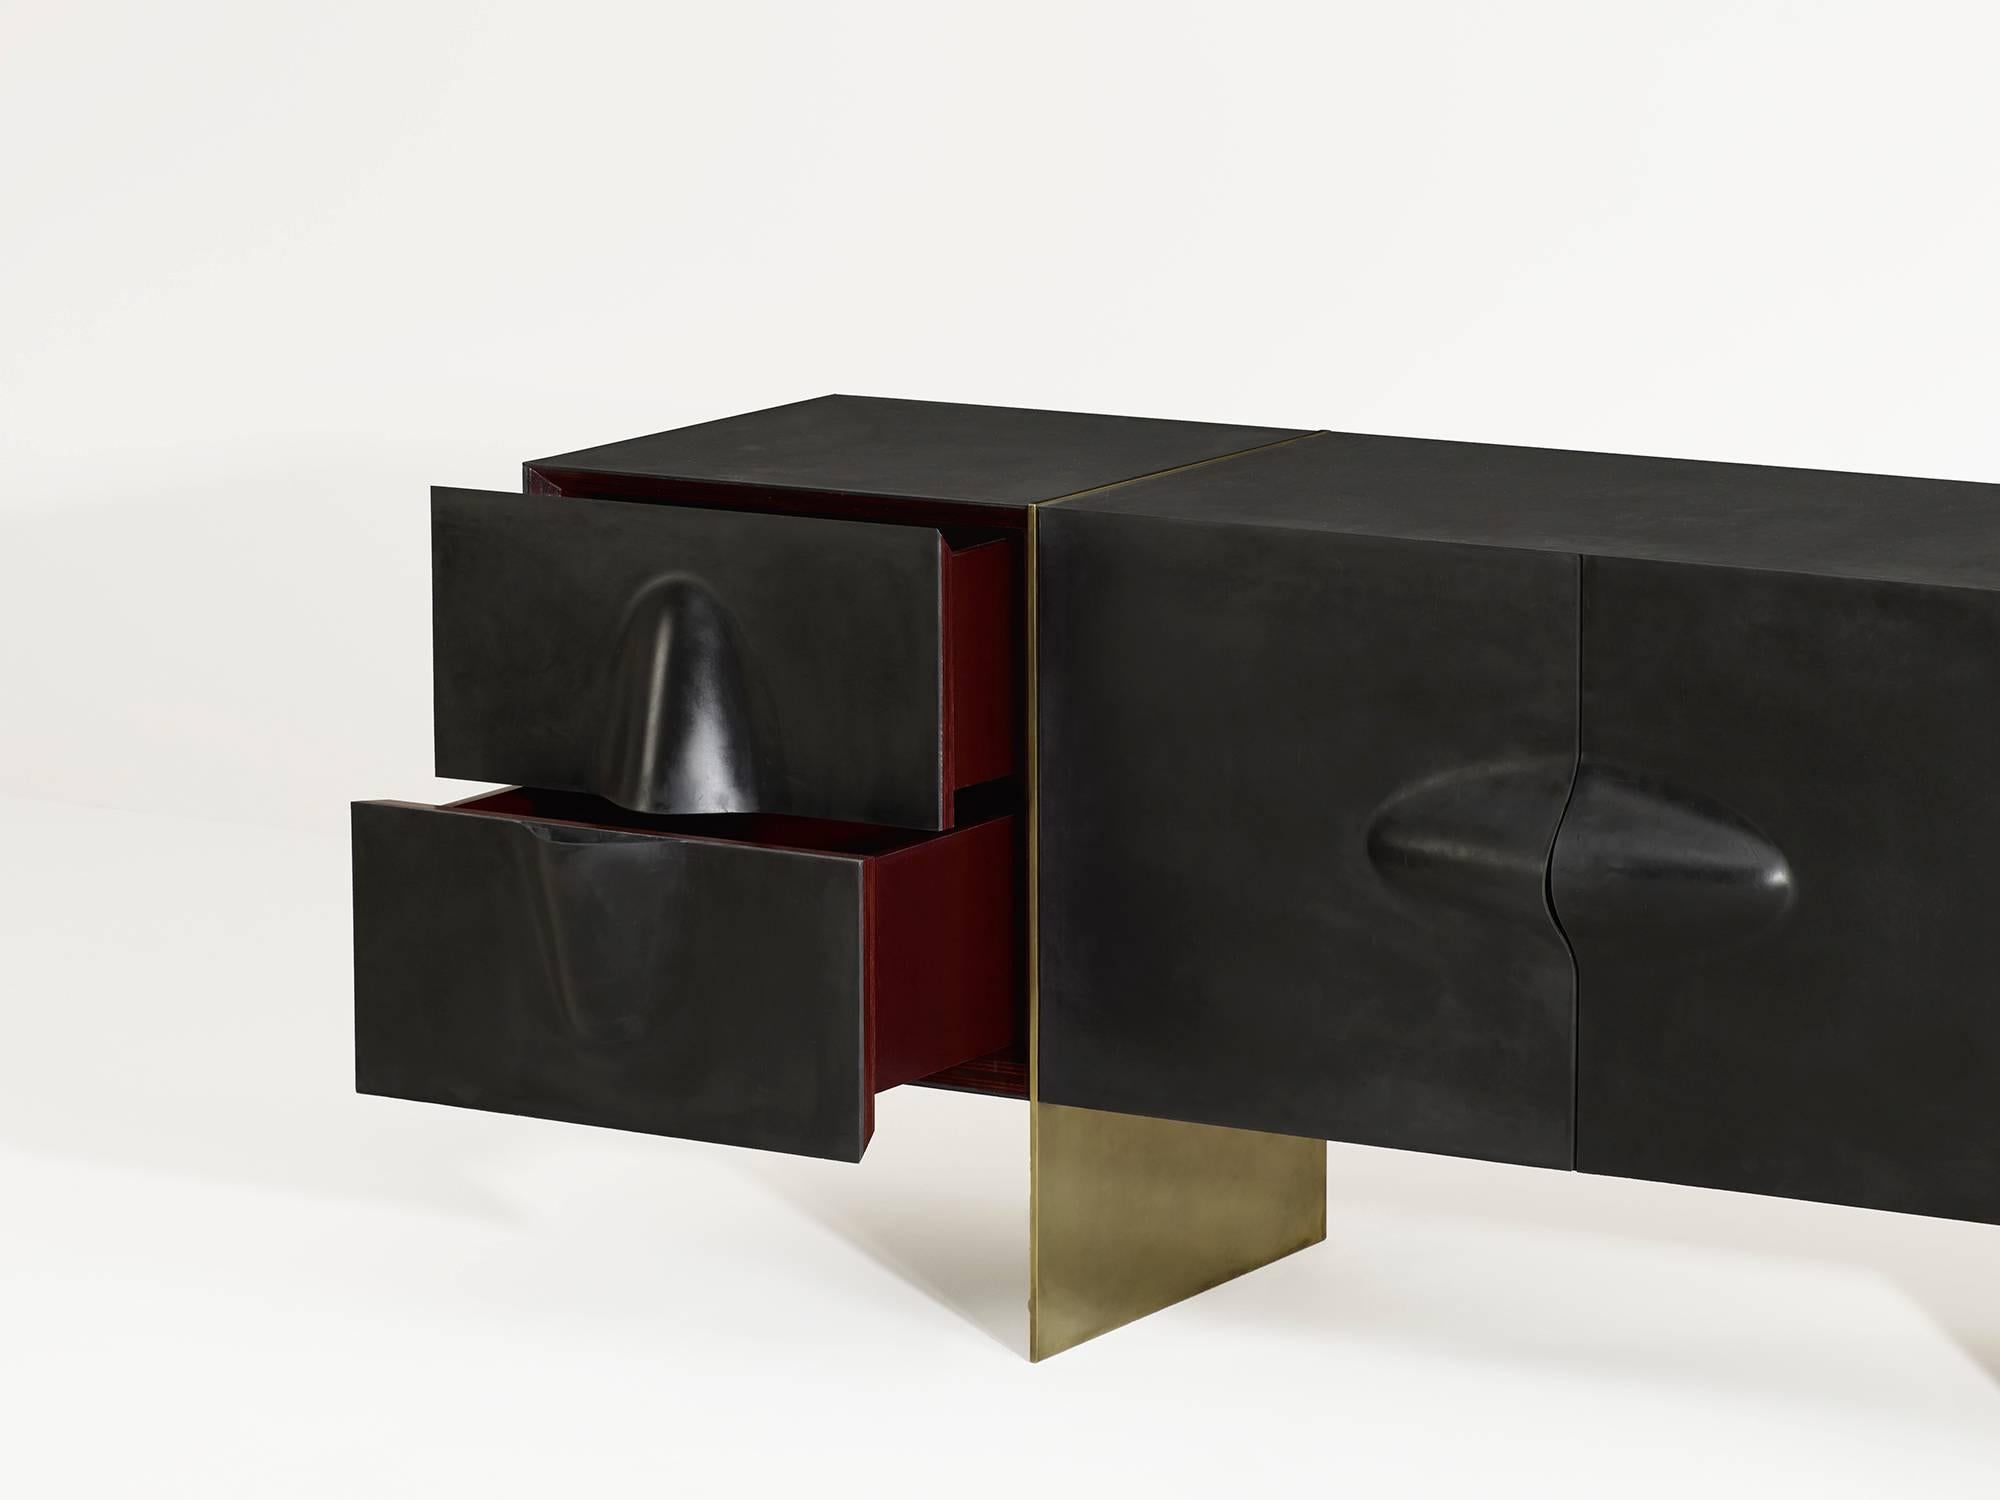 Beautiful rubber and brass credenza with an aniline dyed wood interior by  Brian Thoreen. Made to order in Los Angeles with a lead time of 10-12 weeks. Please inquire for custom sizing. Available with either a red, green, or black interior. 

 